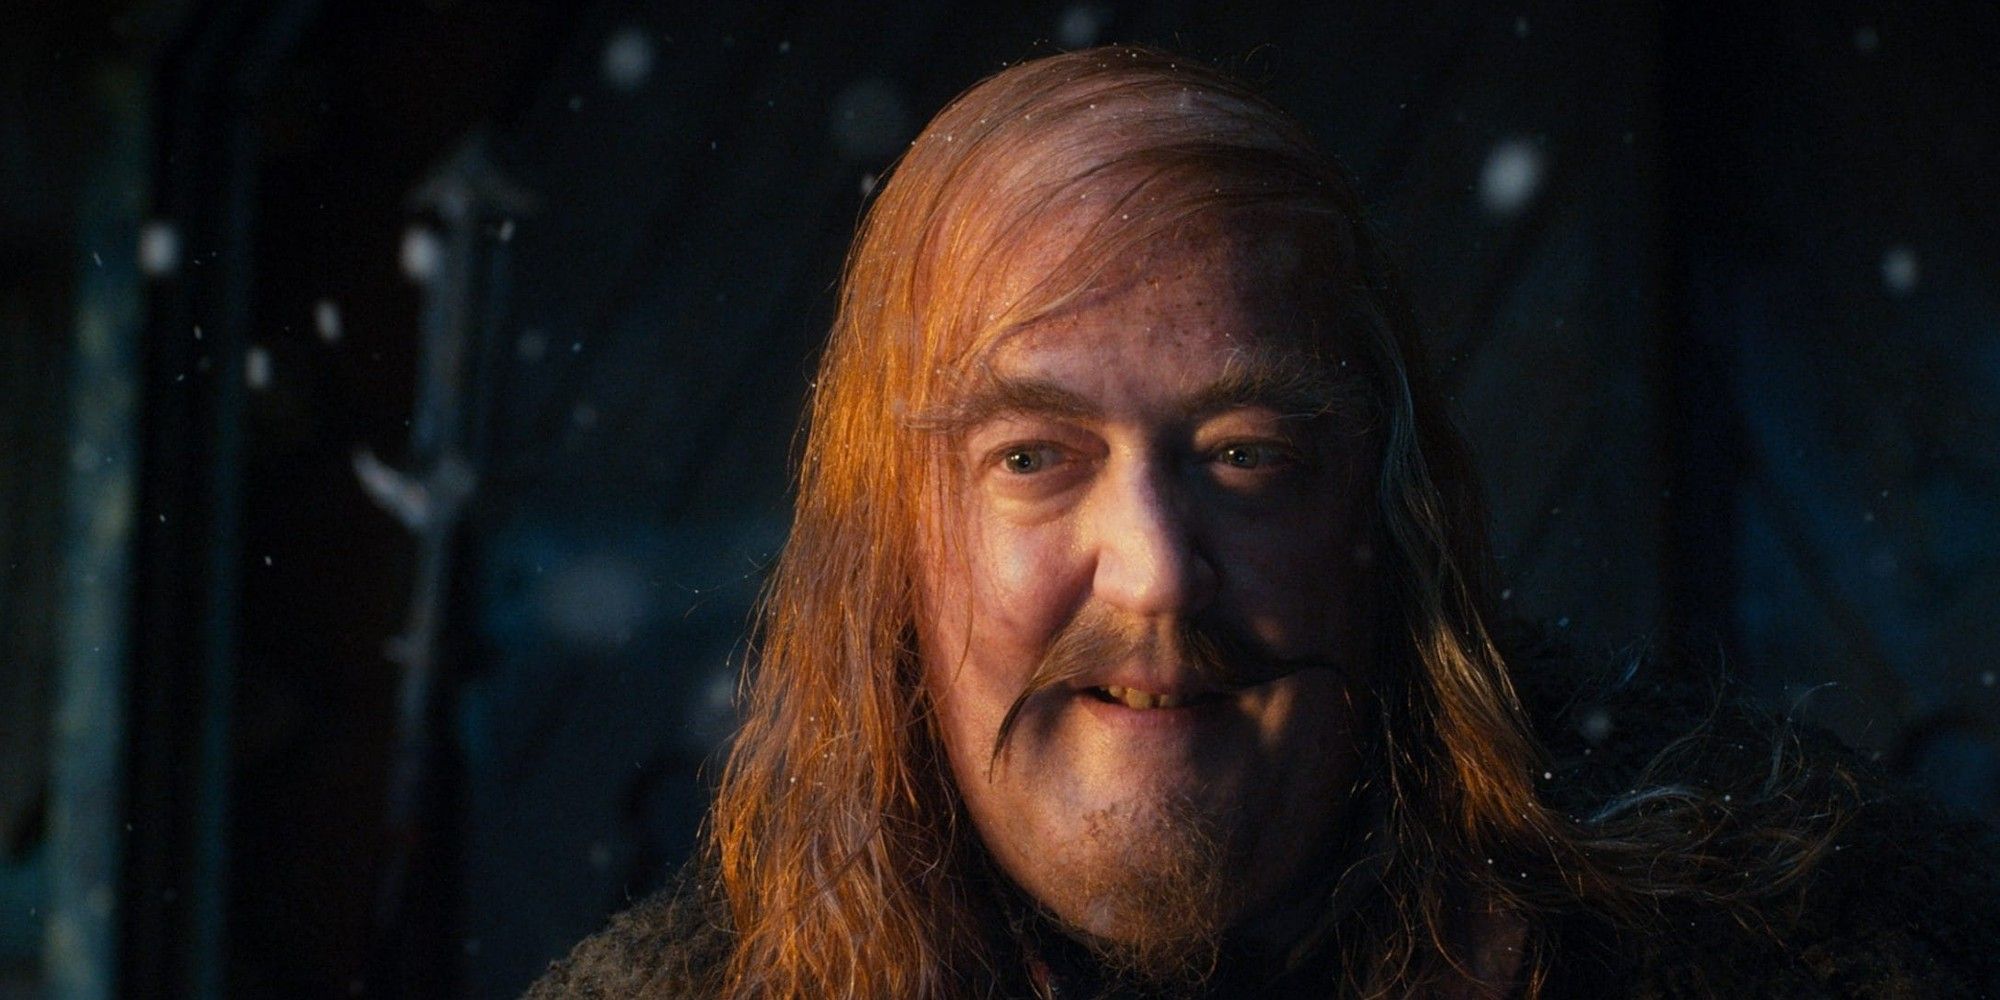 Stephen Fry in The Hobbit The Desolation Of Smaug